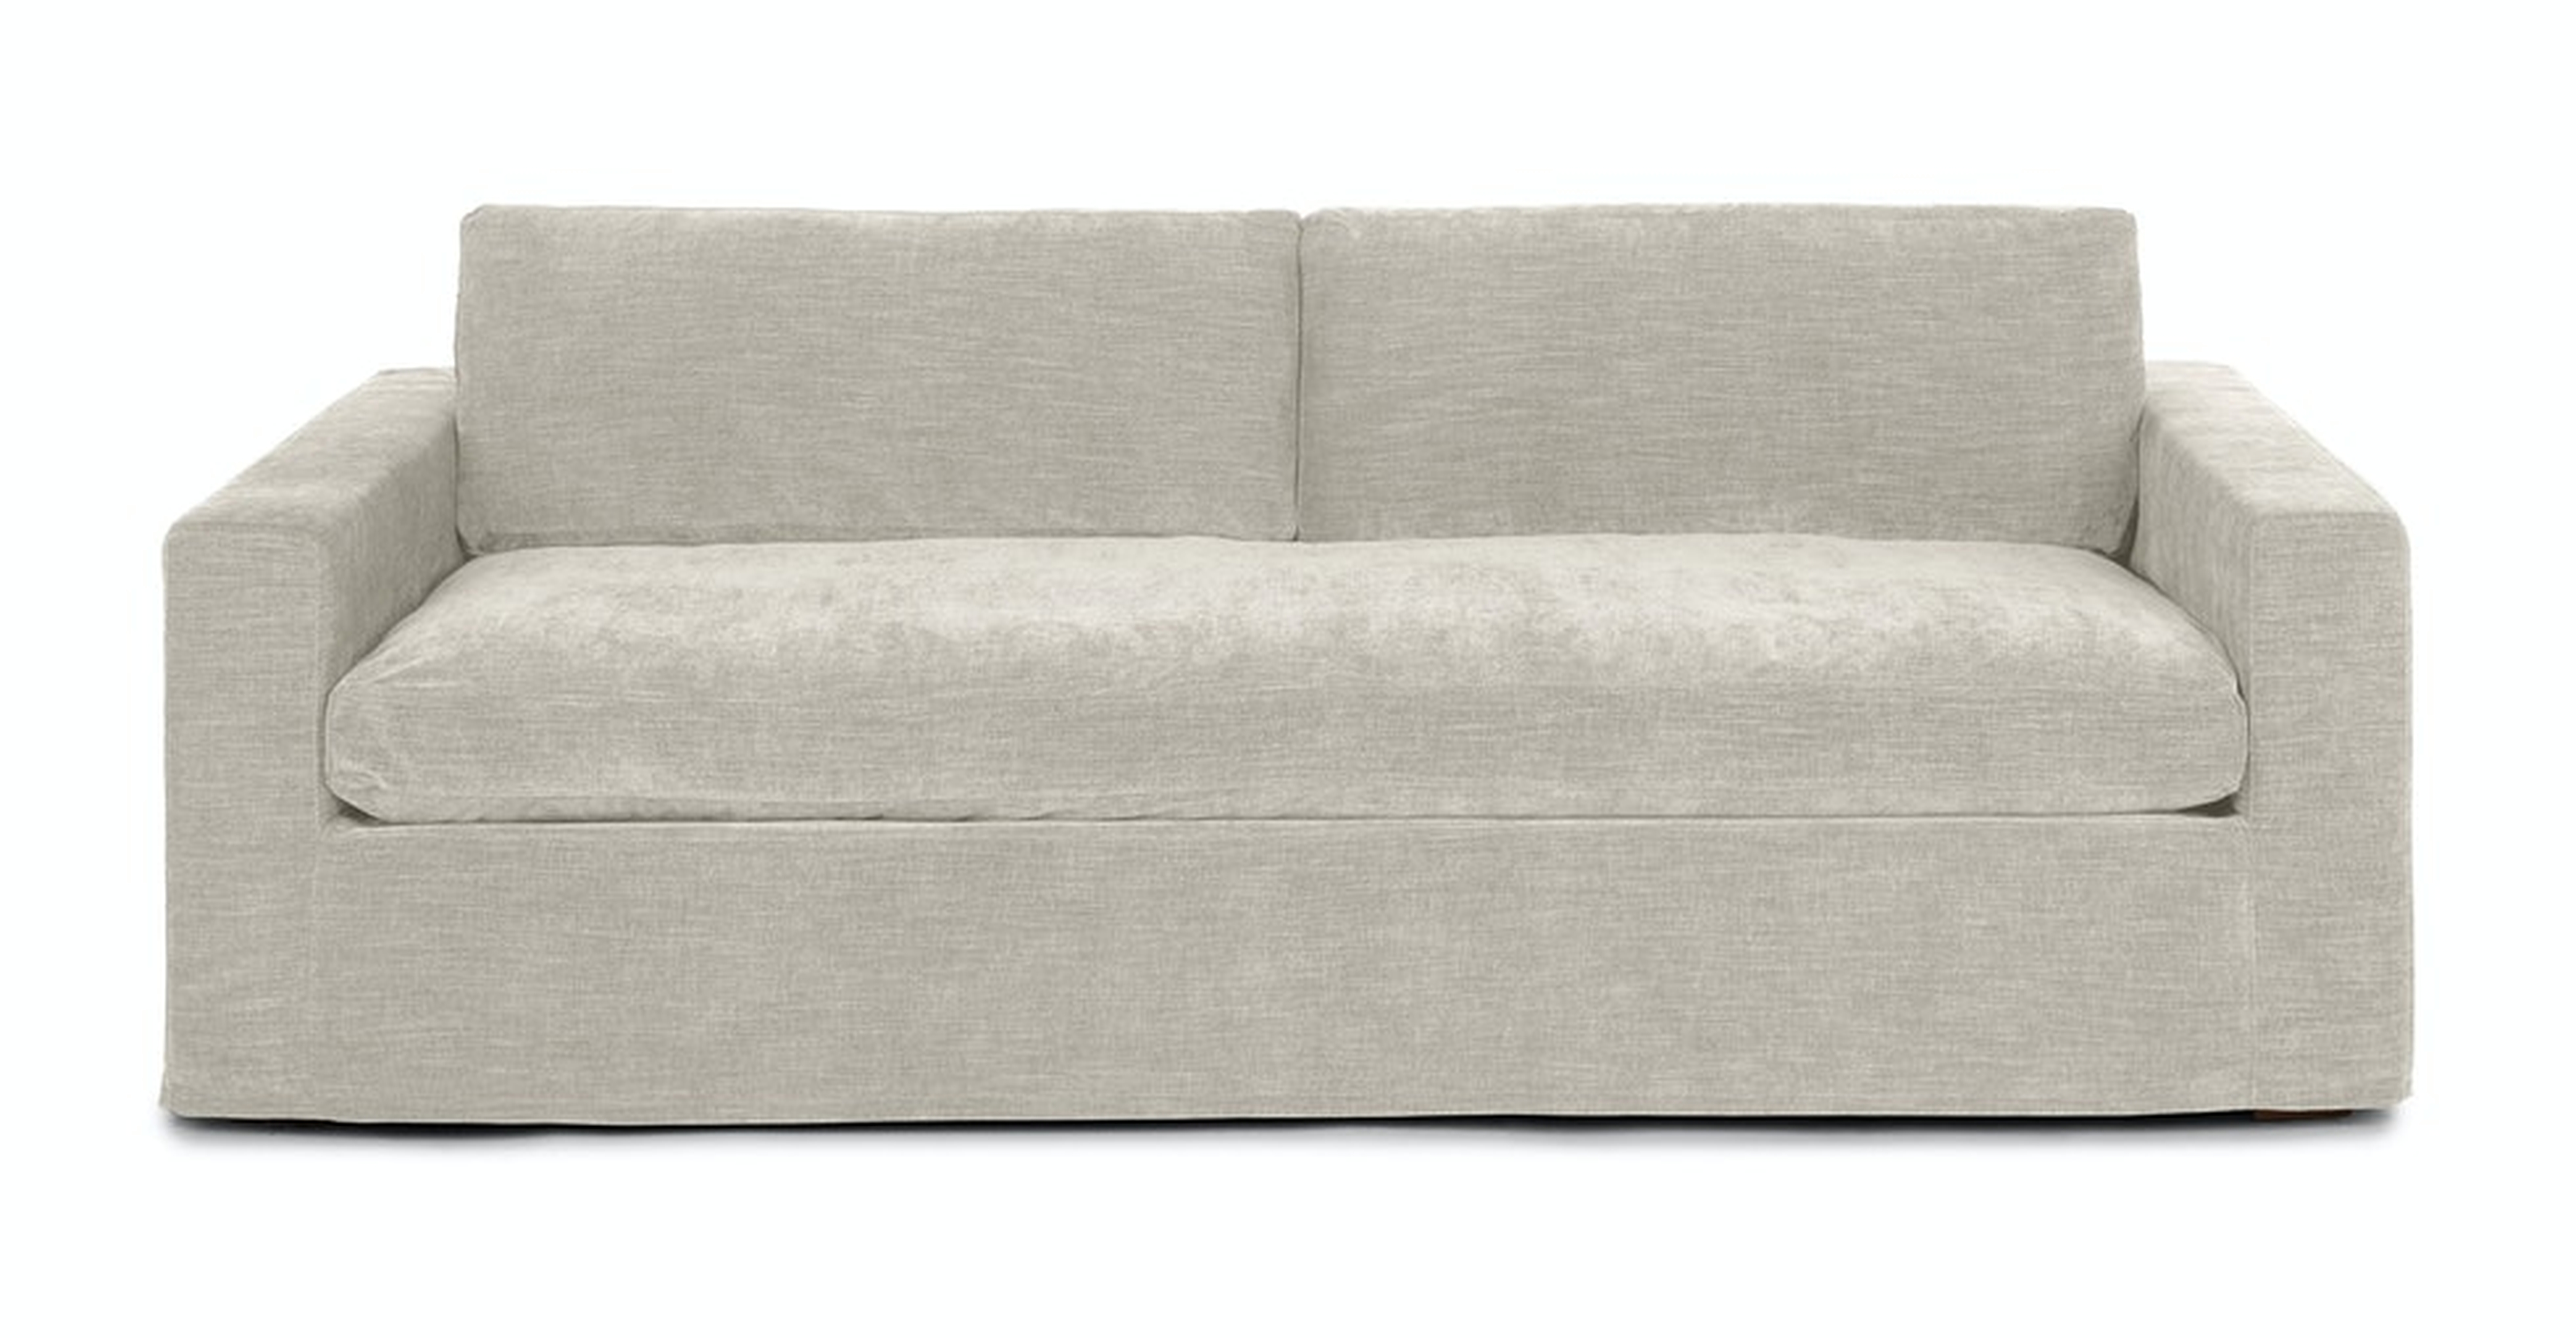 Alzey Slipcover Sofa, Whistle Gray - Article